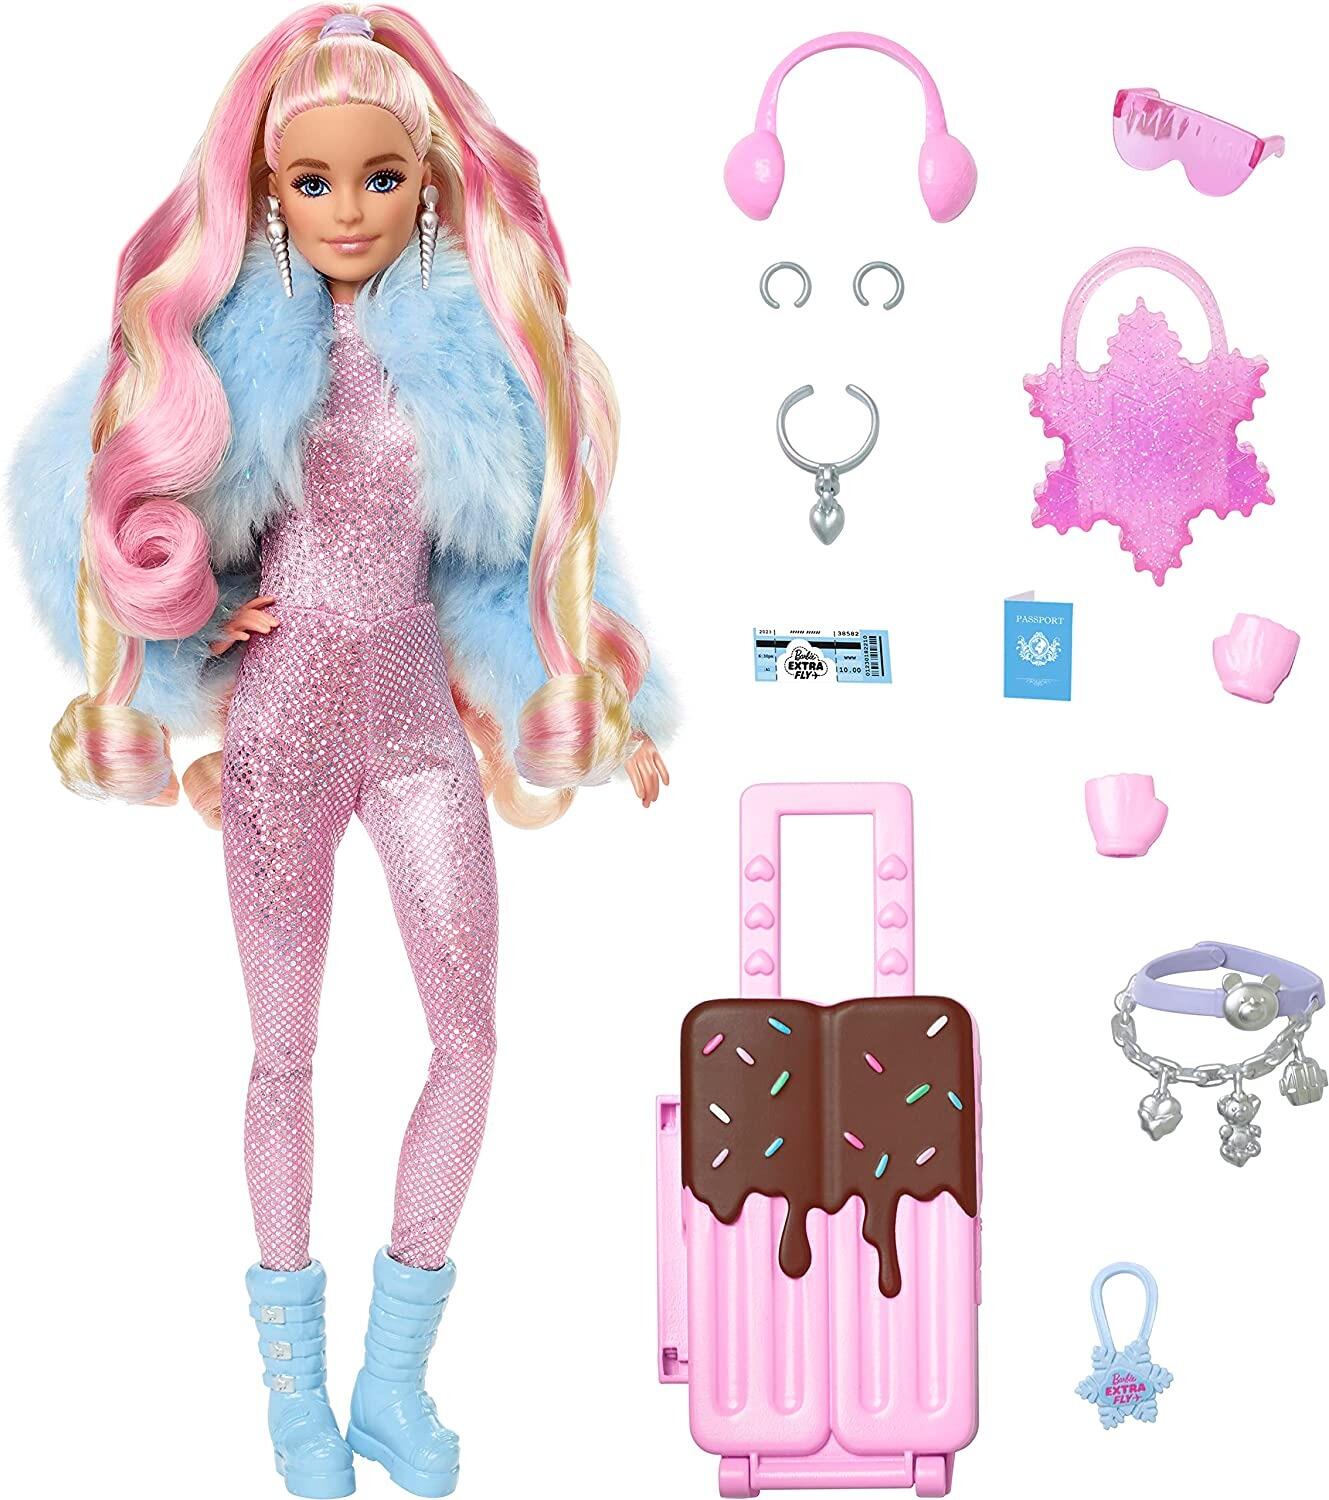 Barbie Extra Fly, Sparkly Pink Jumpsuit and Faux-Fur Coat, Travel Barbie Doll with Wintery Snow Fashion,